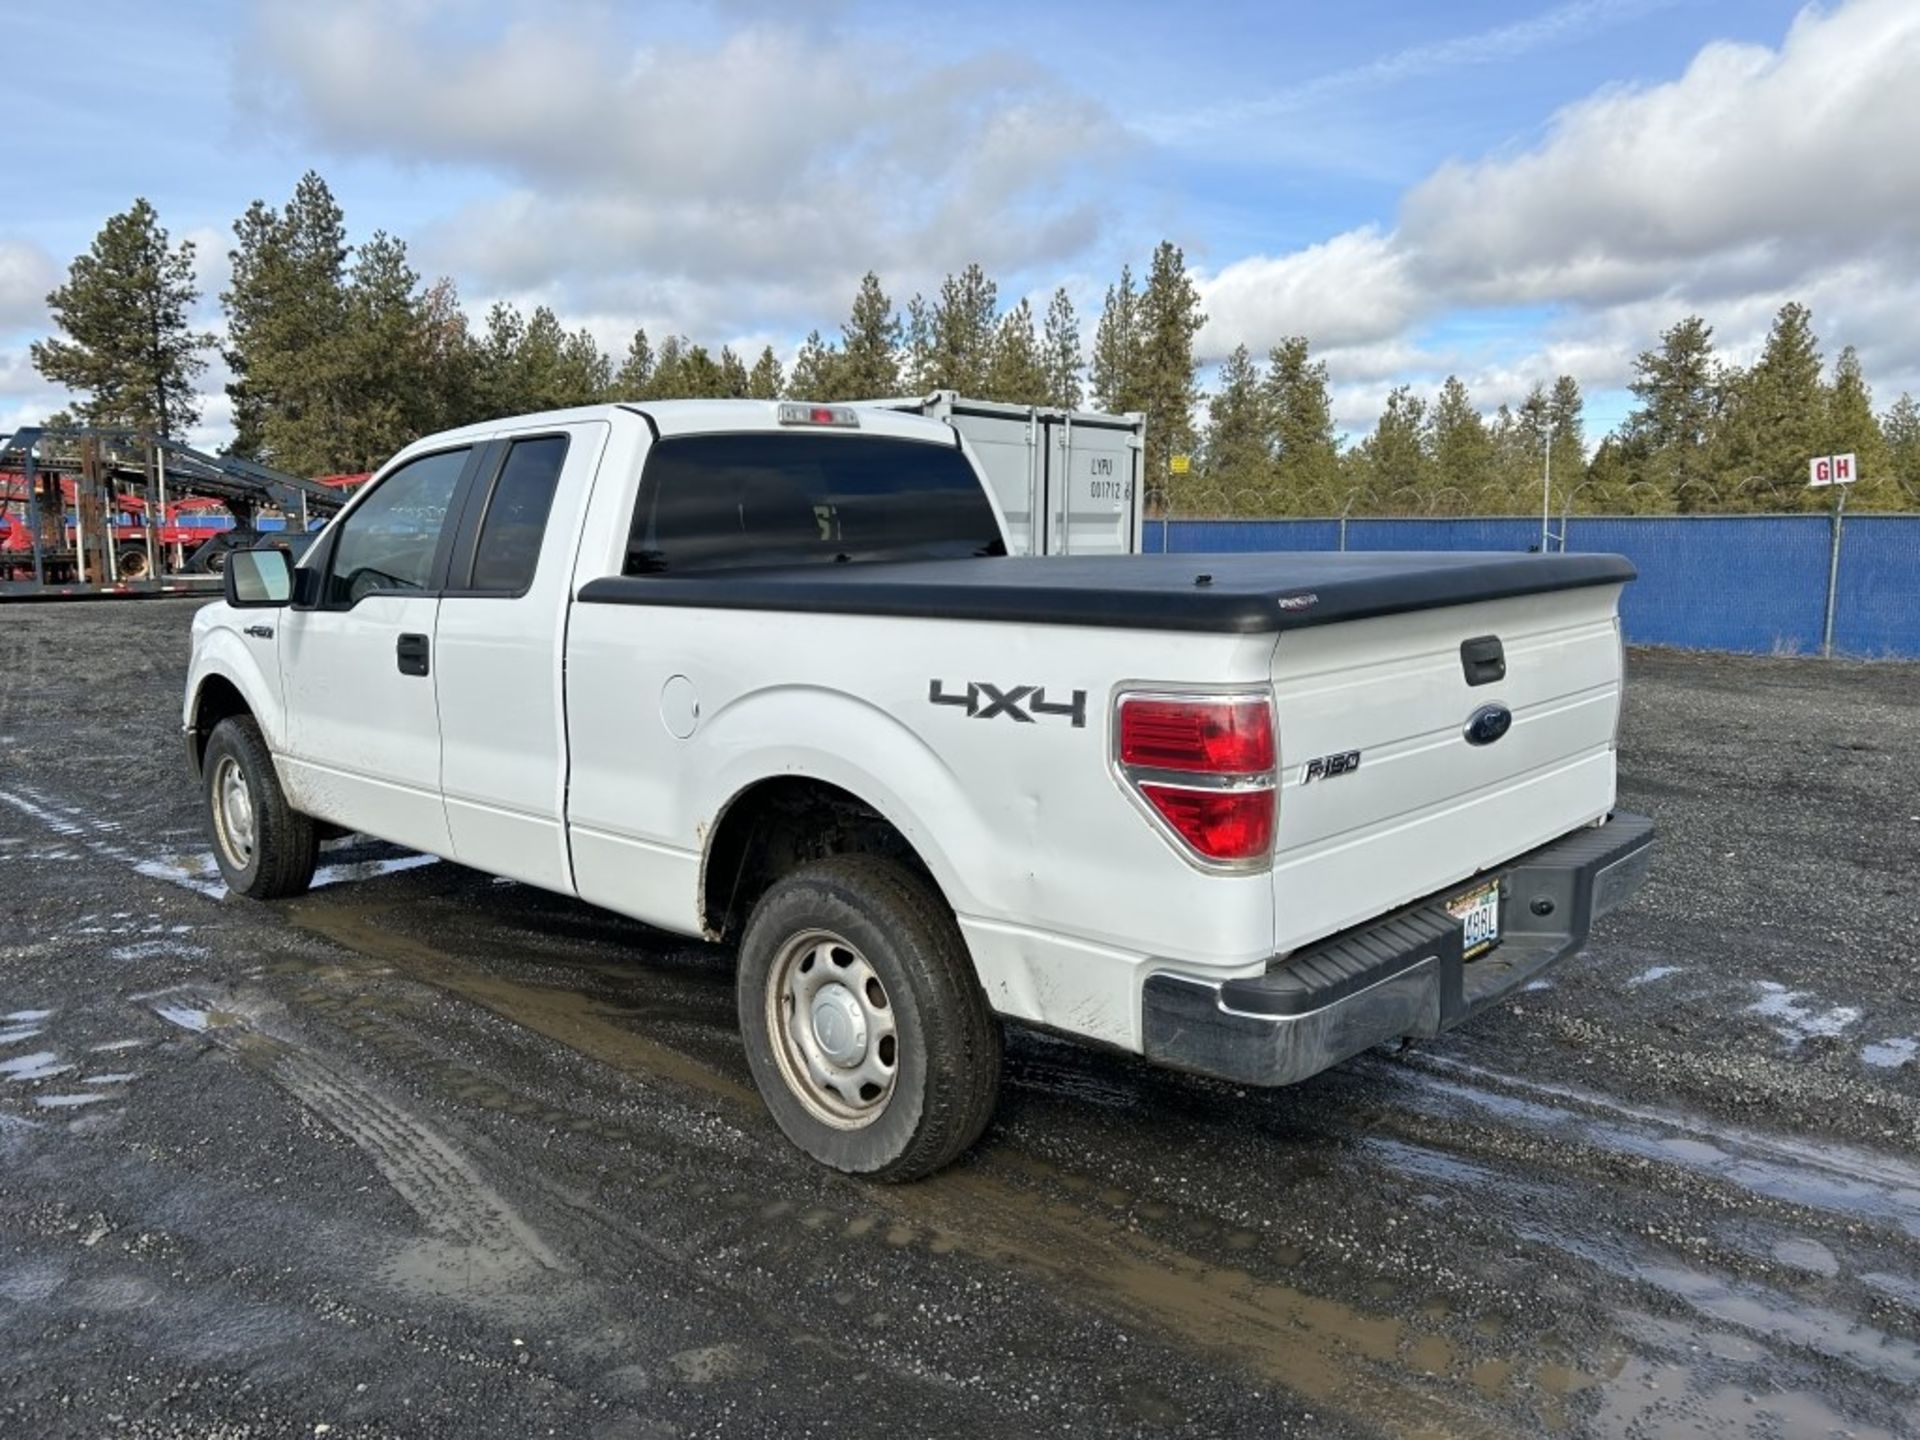 2010 Ford F150 XLT 4x4 Extra Cab Pickup - Image 3 of 42